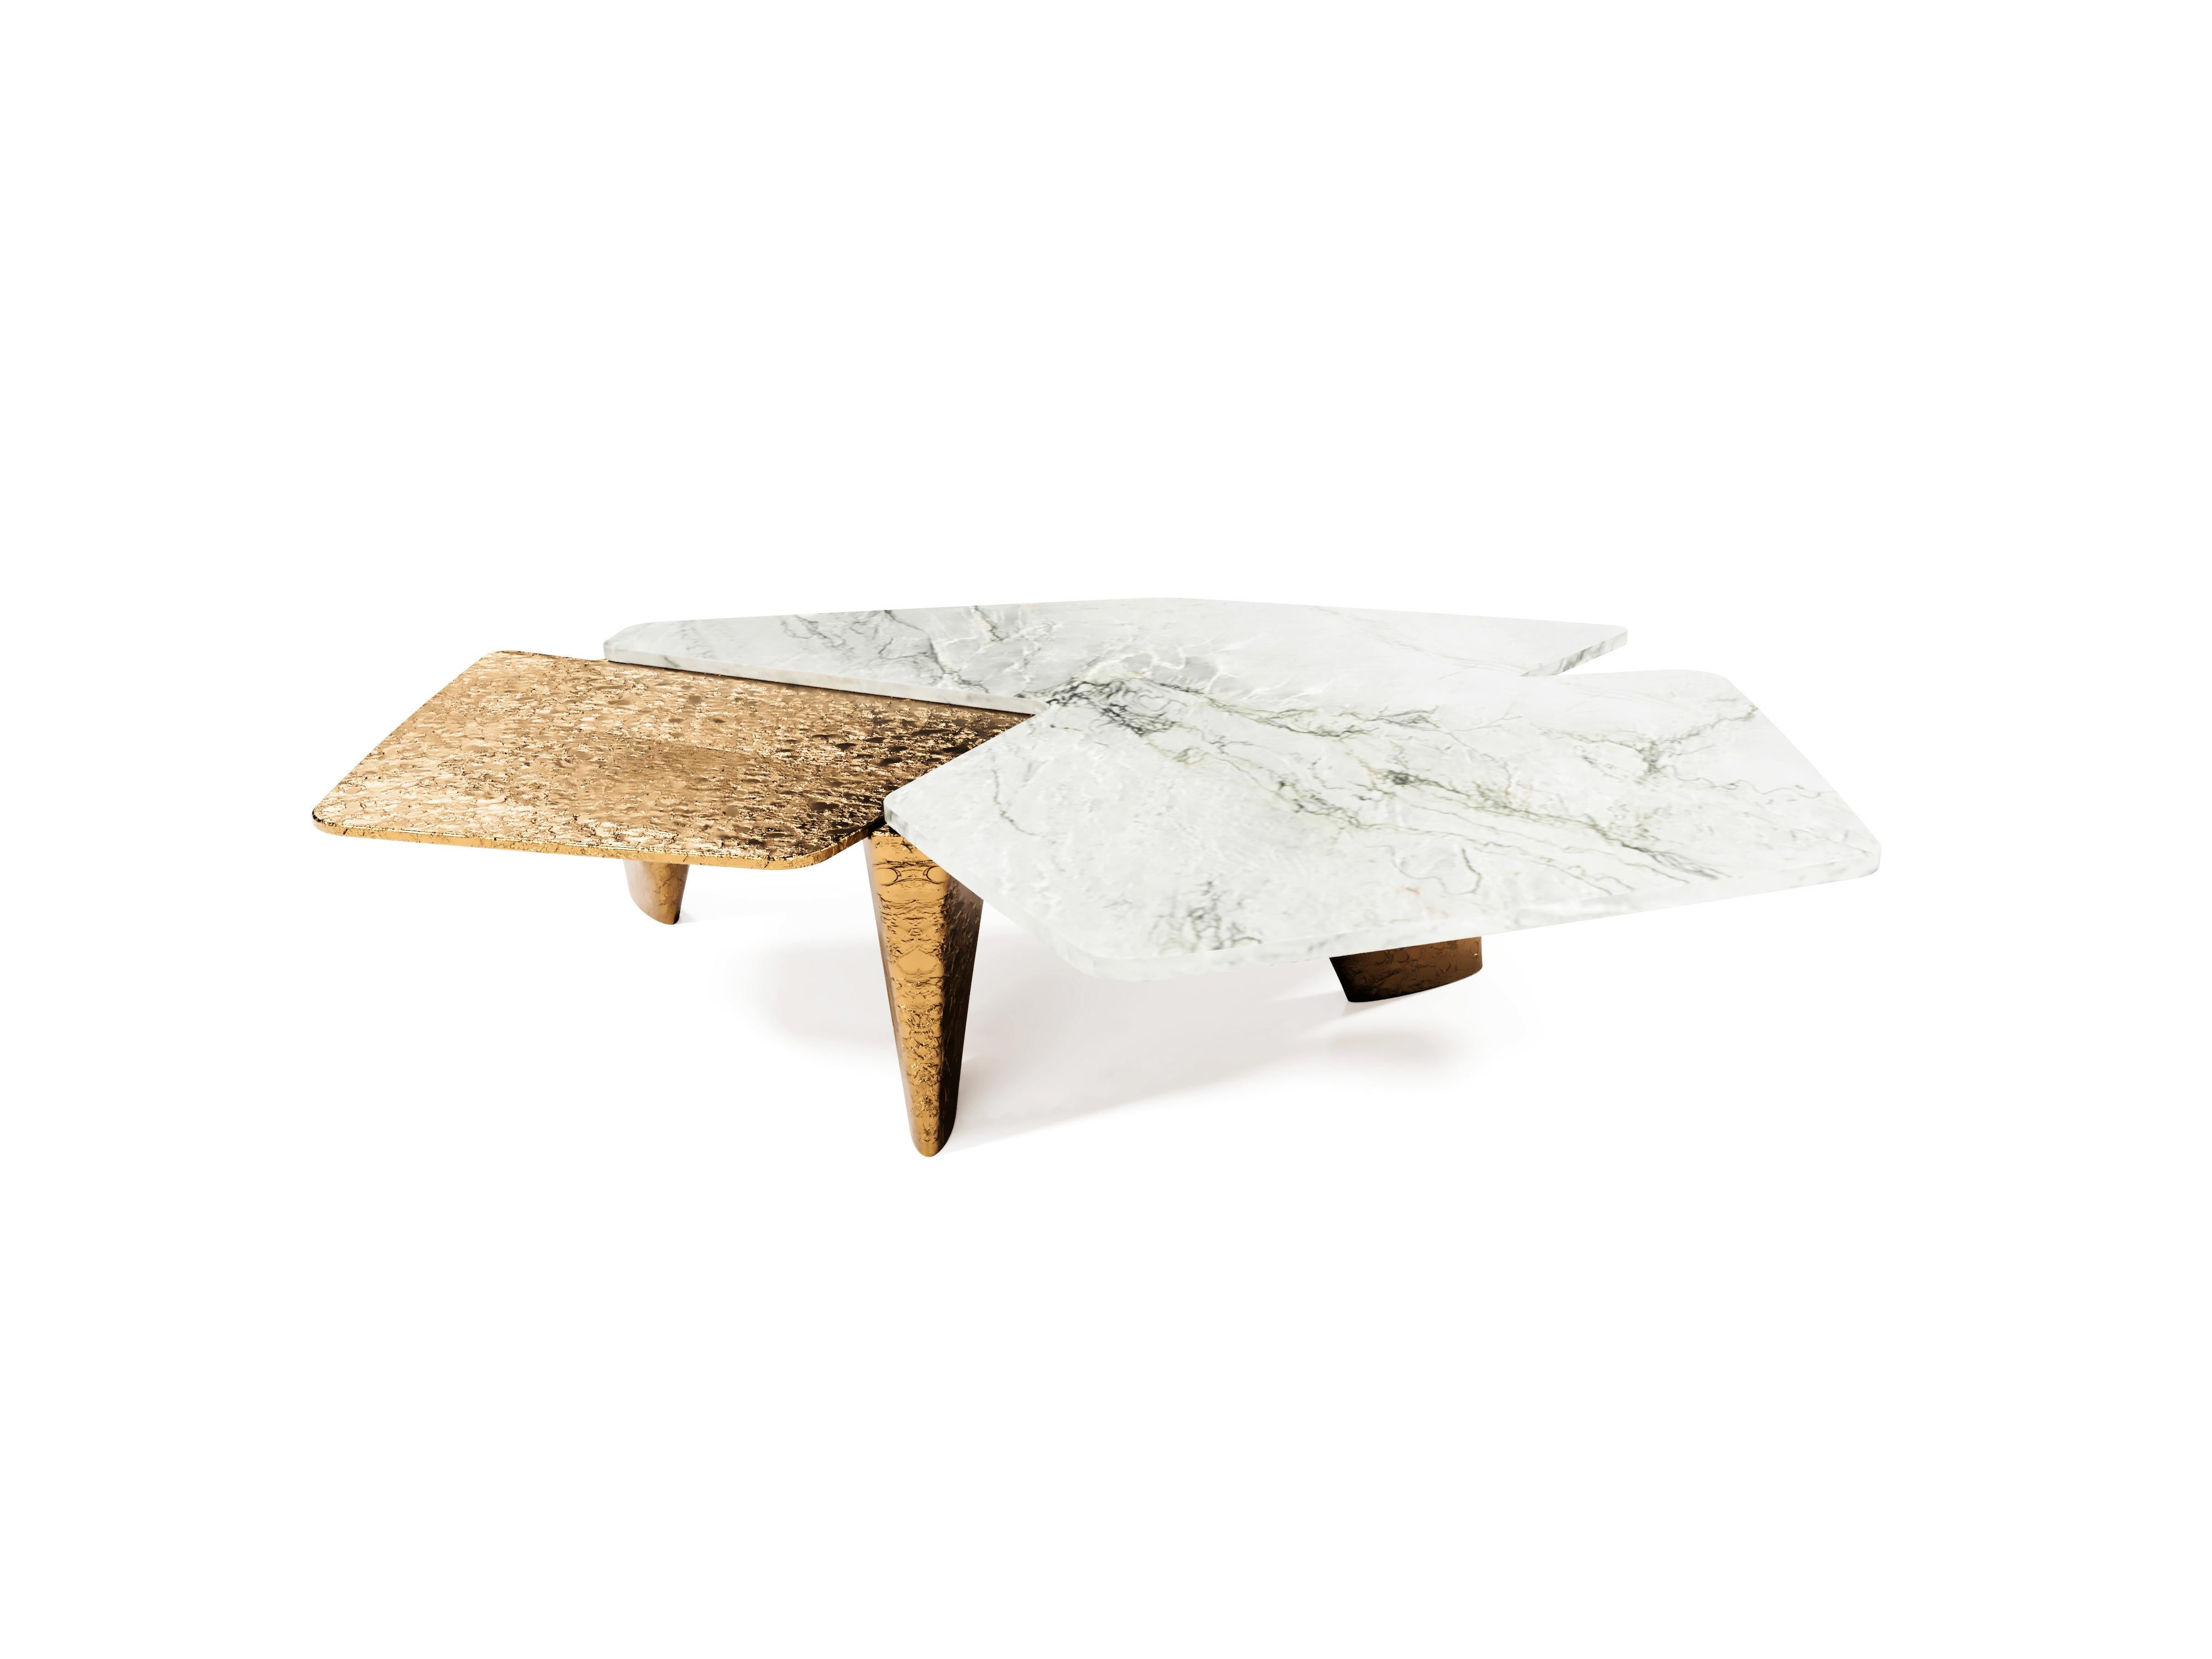 British The Elements I Coffee Table, 1 of 1 by Grzegorz Majka For Sale